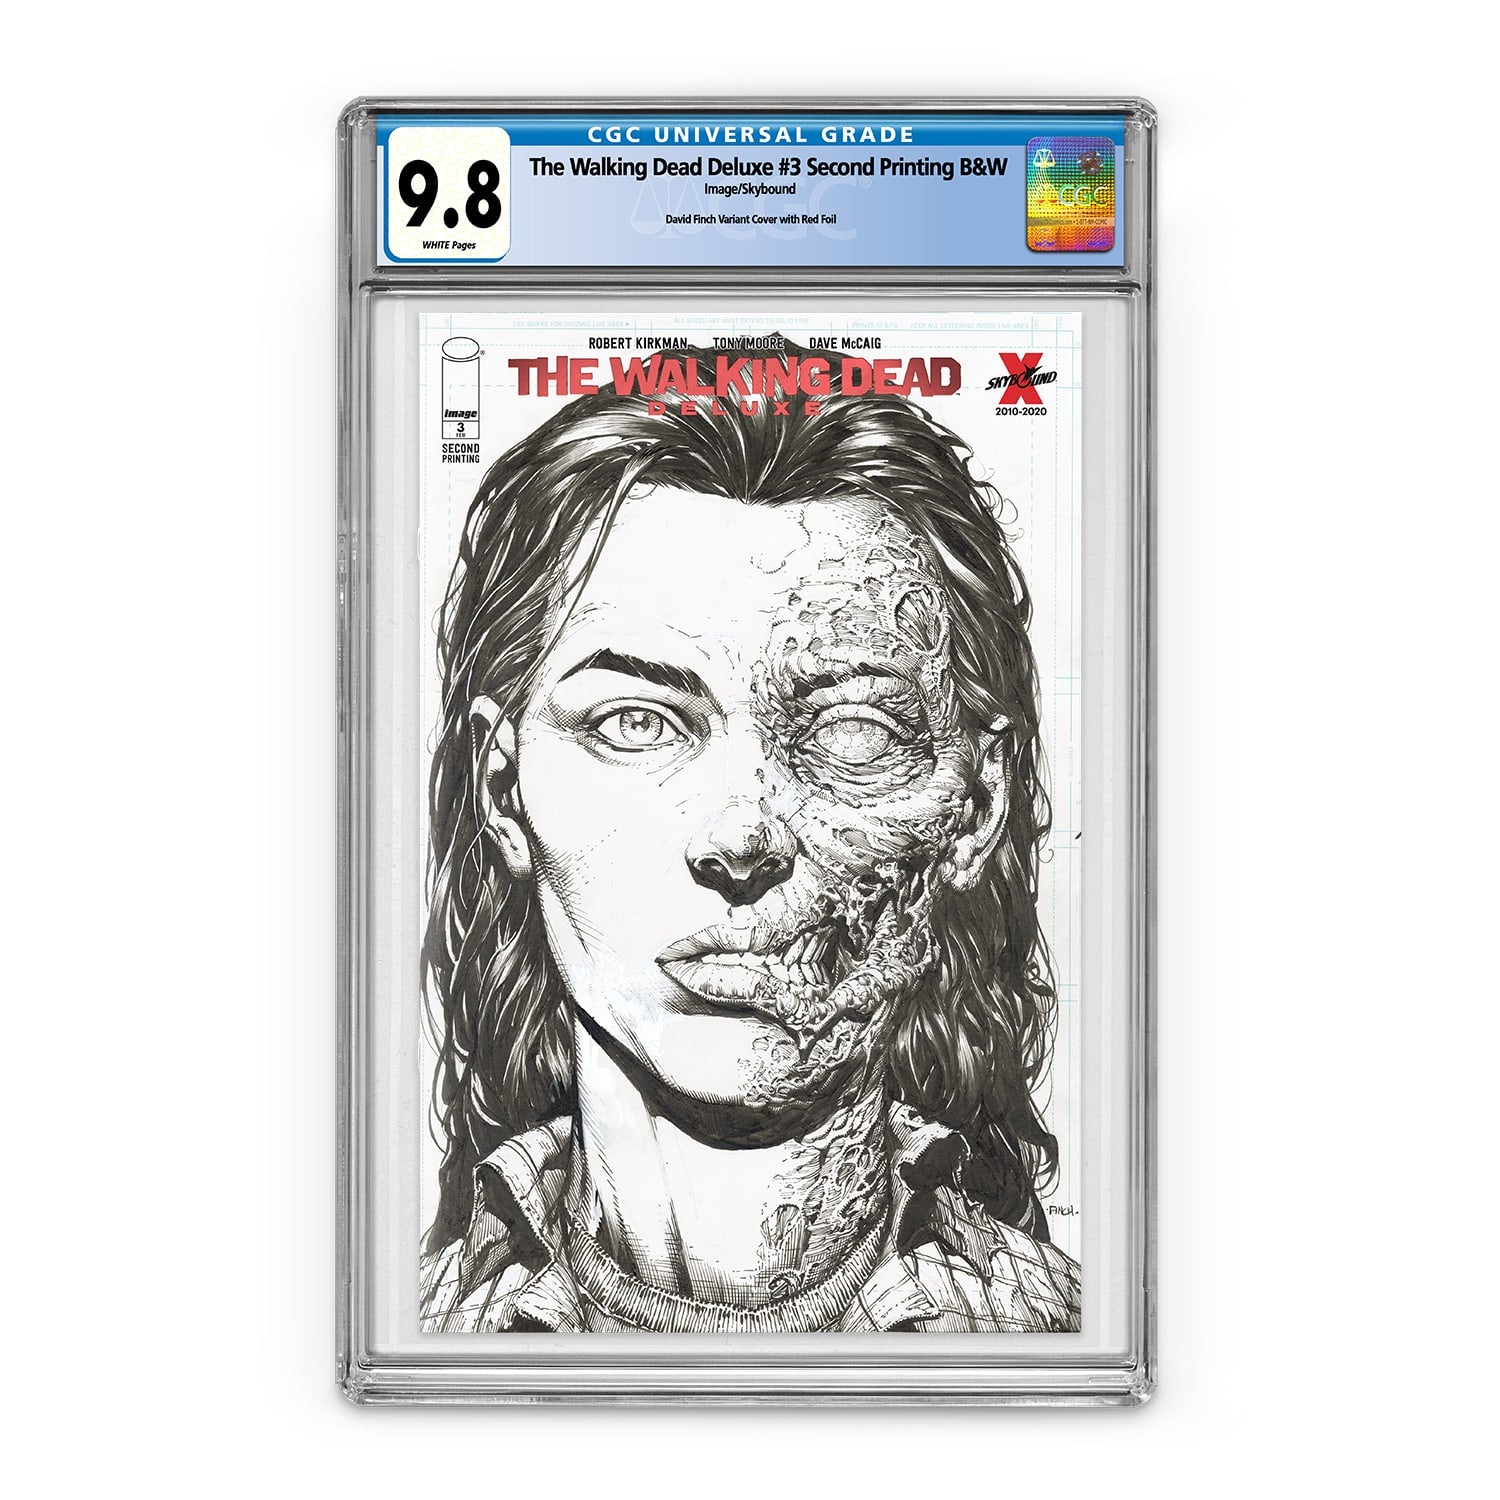 The Walking Dead Deluxe #3 Second Printing B&W with Red Foil Logo CGC 9.8